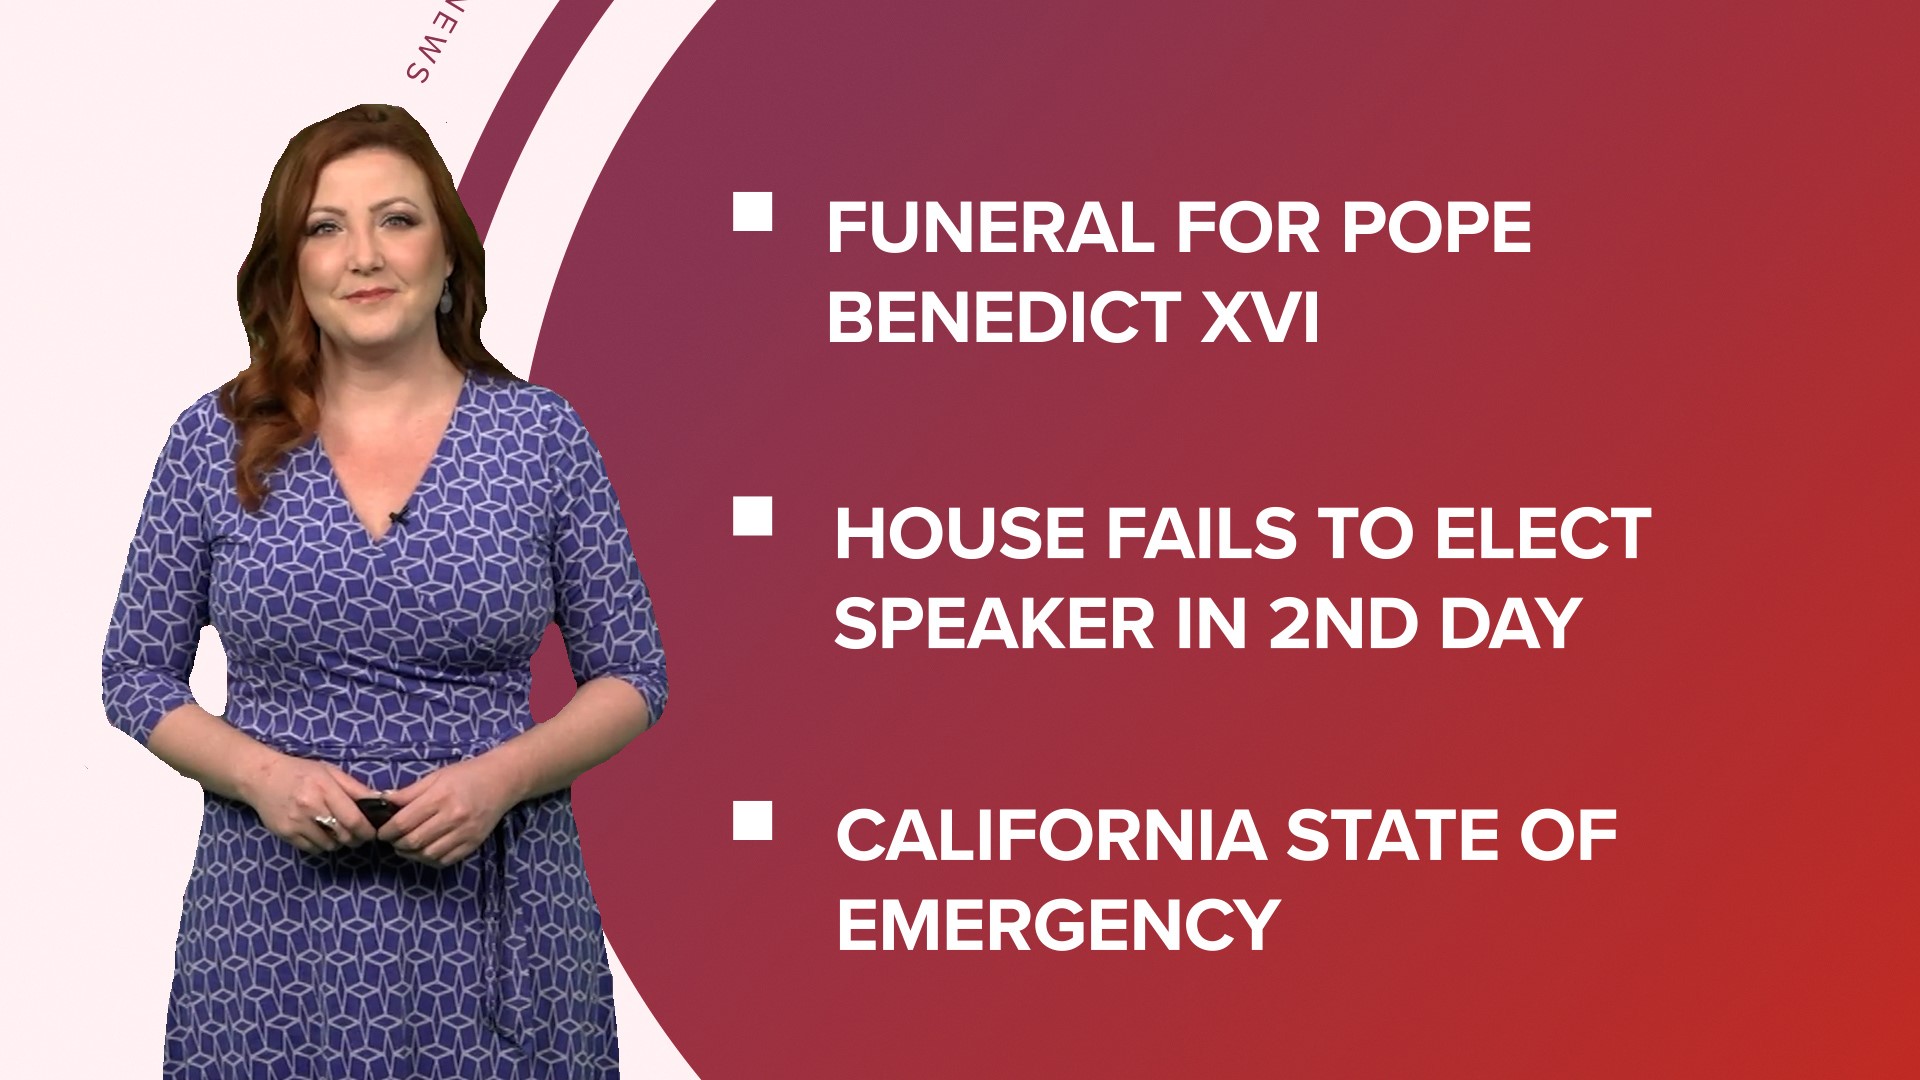 A look at what is happening in the news from Pope Benedict XVI's funeral in Vatican City to Amazon laying off thousands and flooding in California.